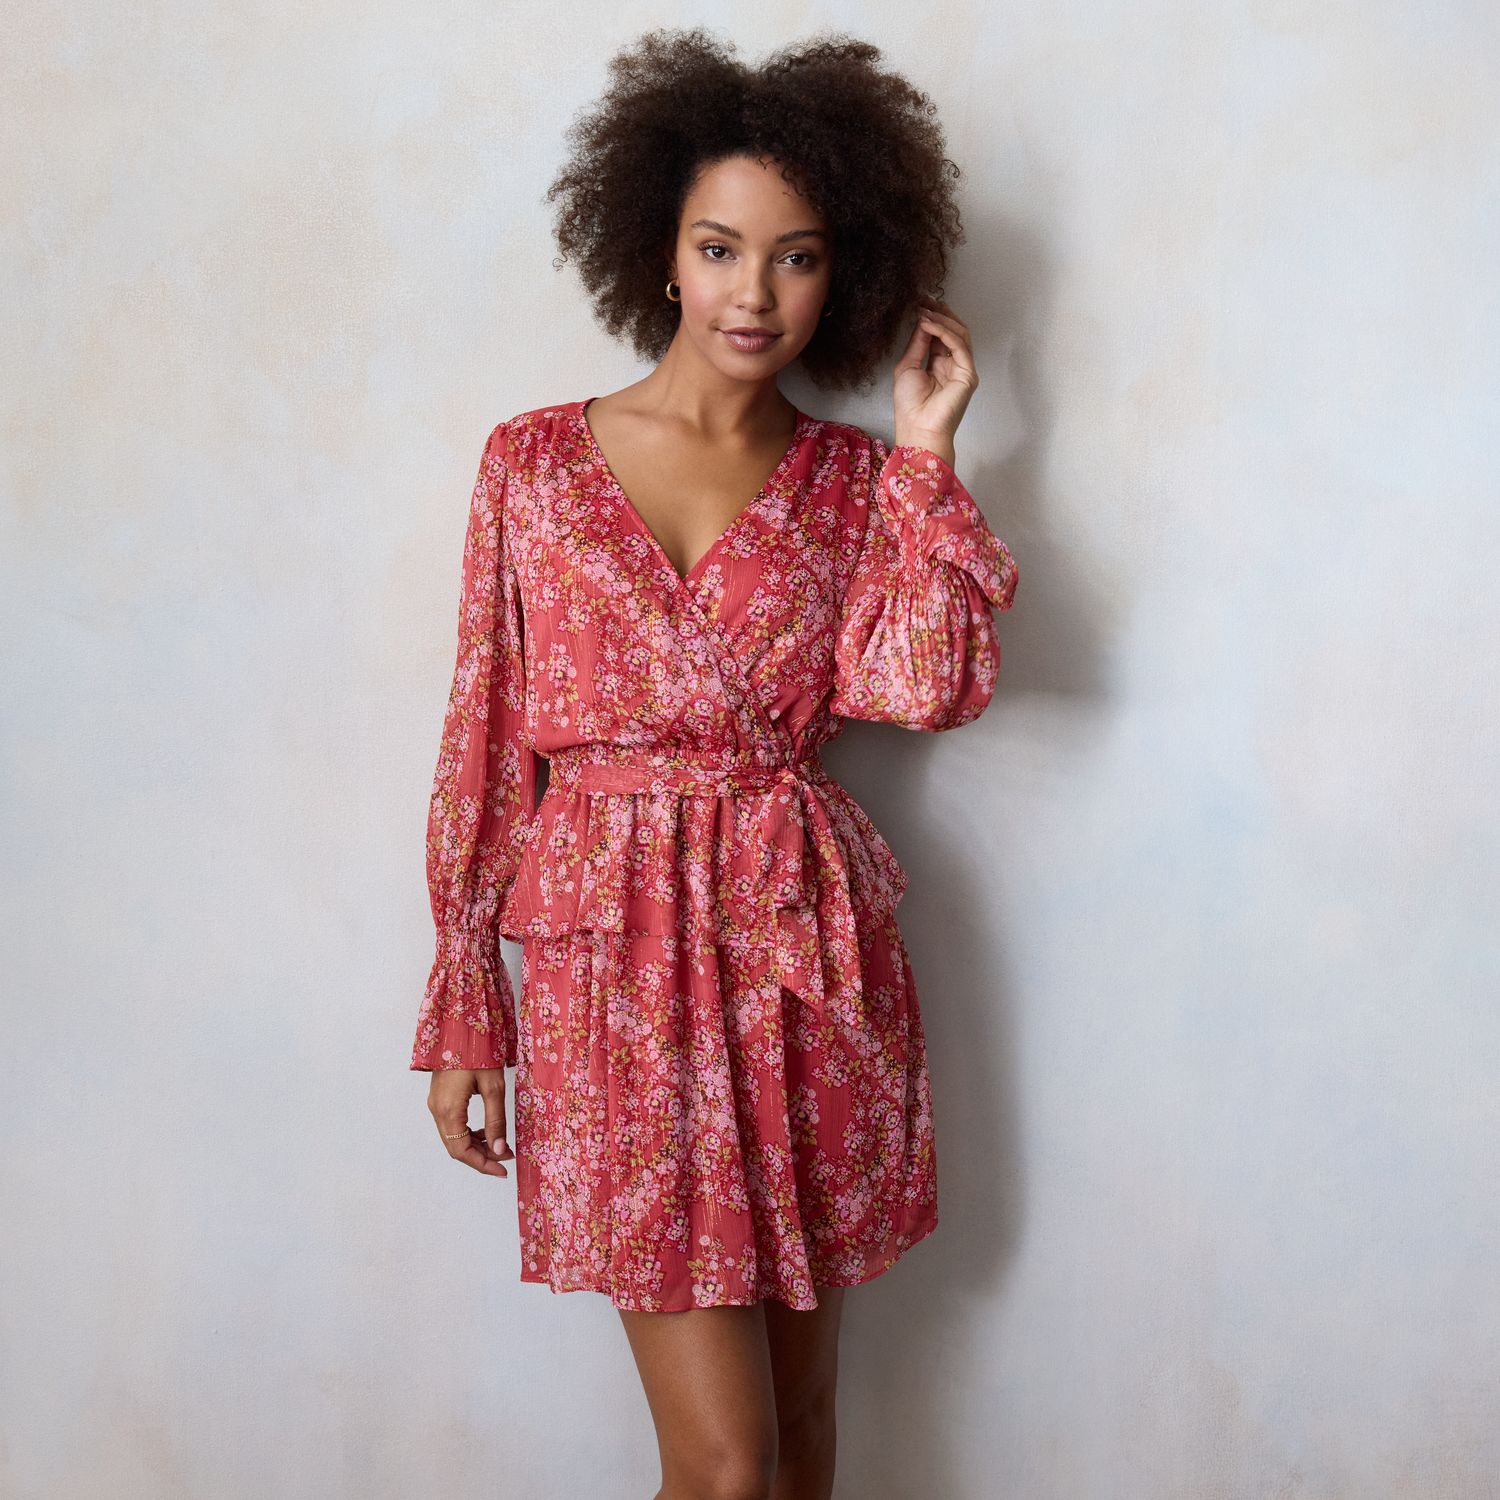 Let Love Shine in Valentine’s Day Outfit Ideas from Kohl’s